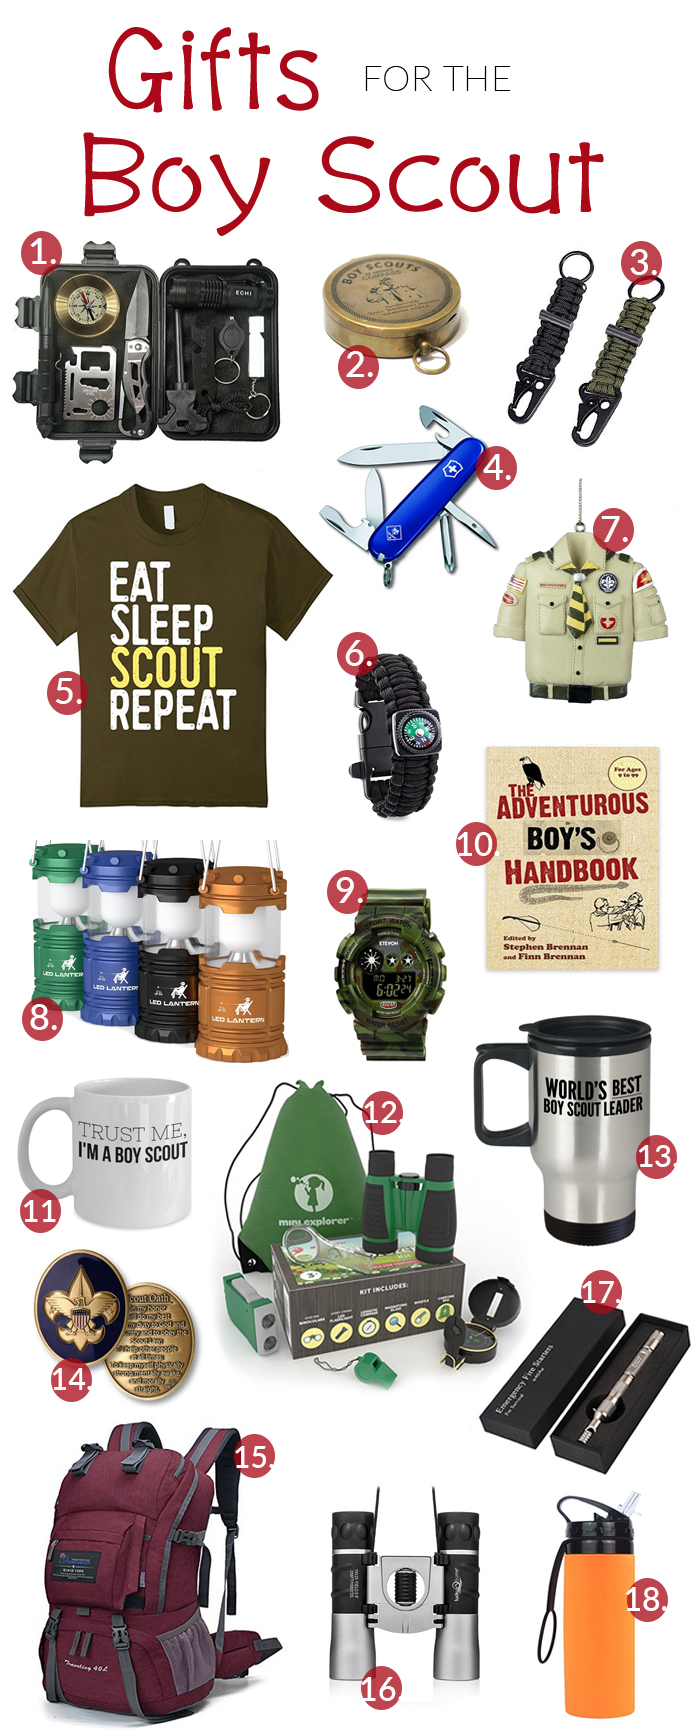 Great gift ideas for your Boy Scout, Scout leader, or anyone involved in scouts, young or old. 